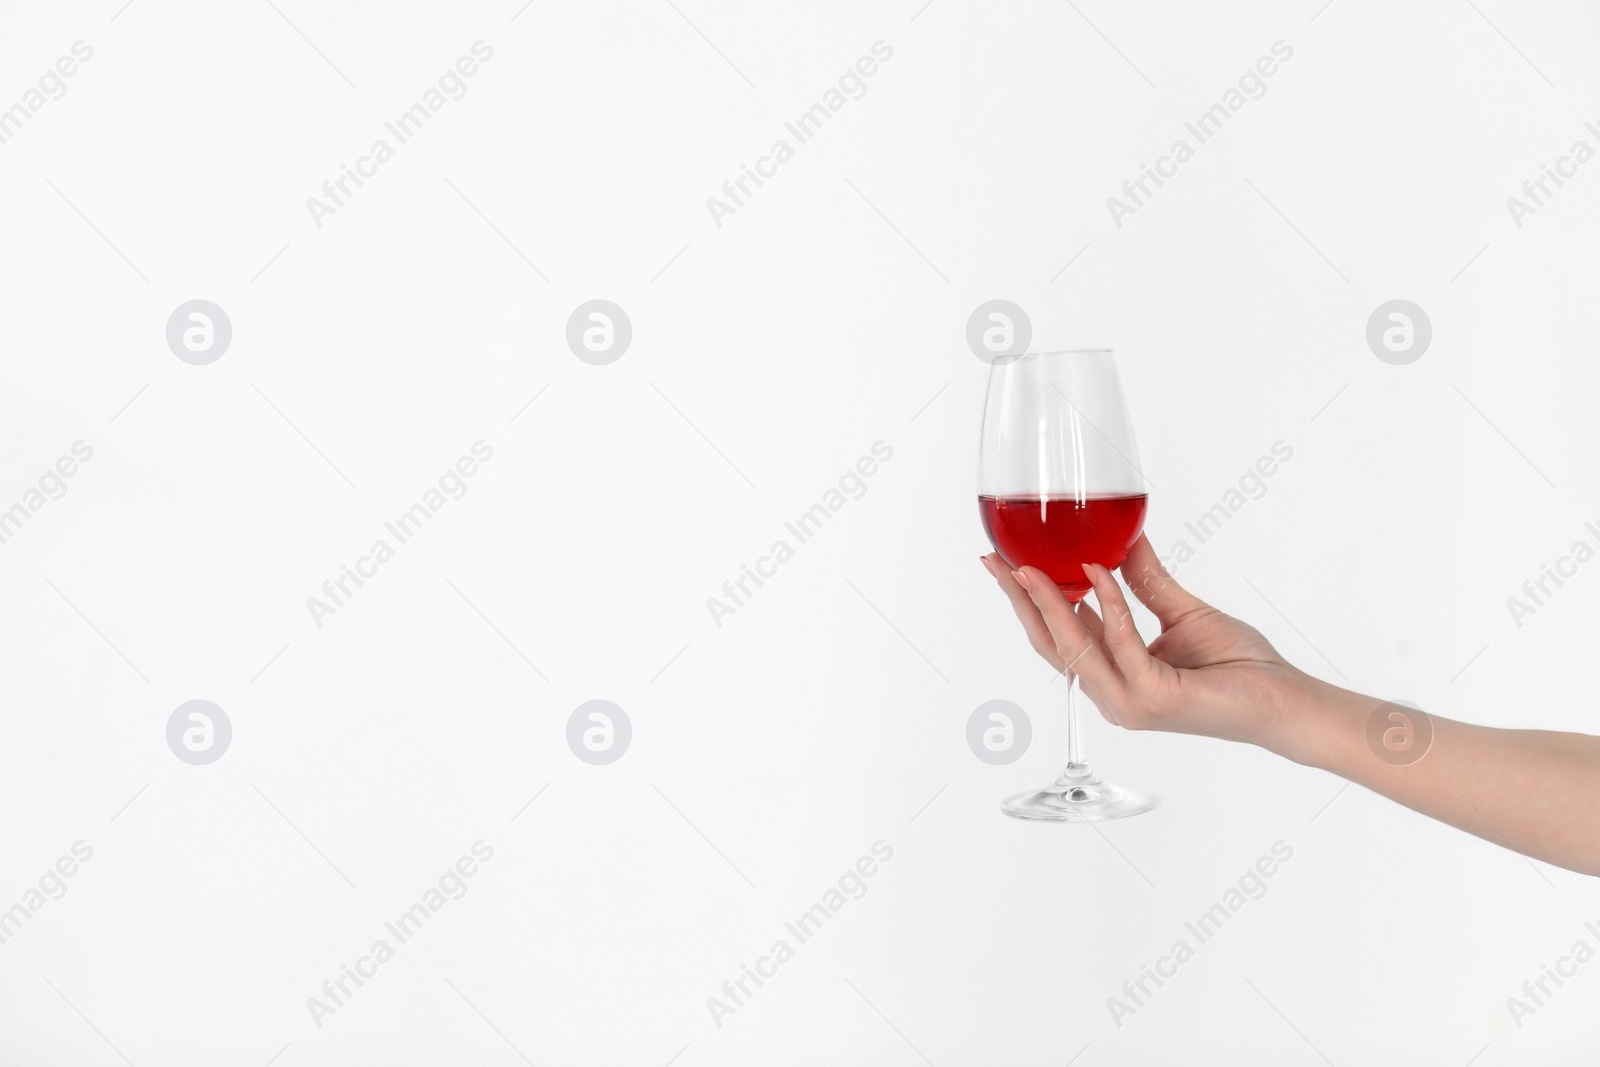 Photo of Woman holding glass of wine on light background